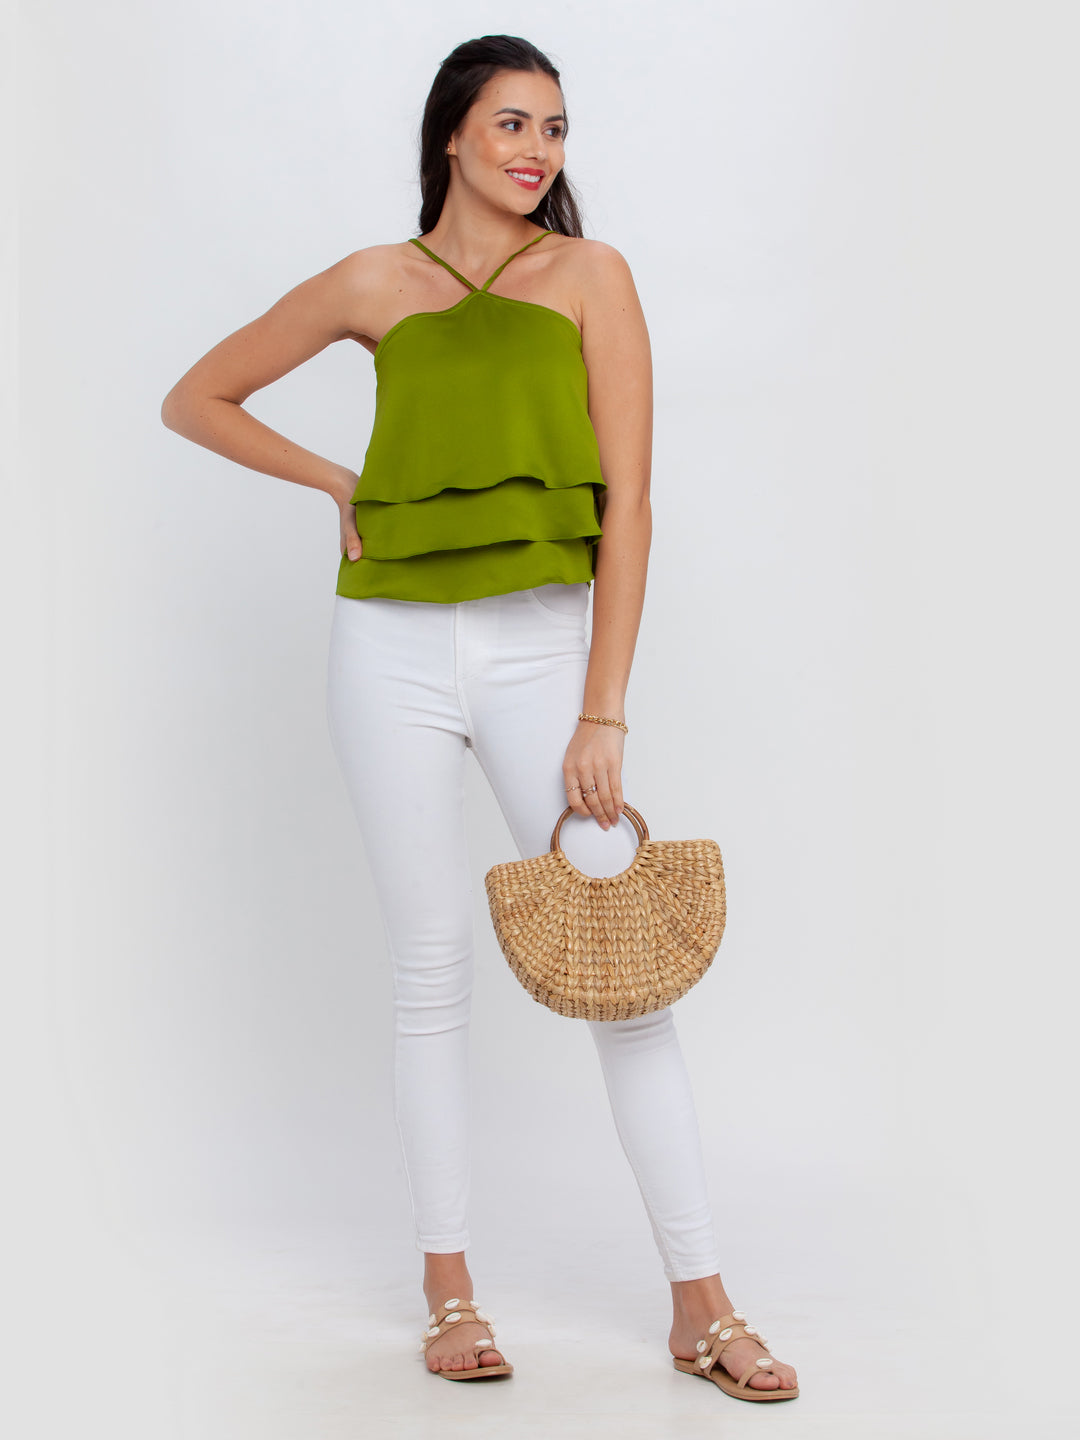 Green Solid Strappy Top For Women